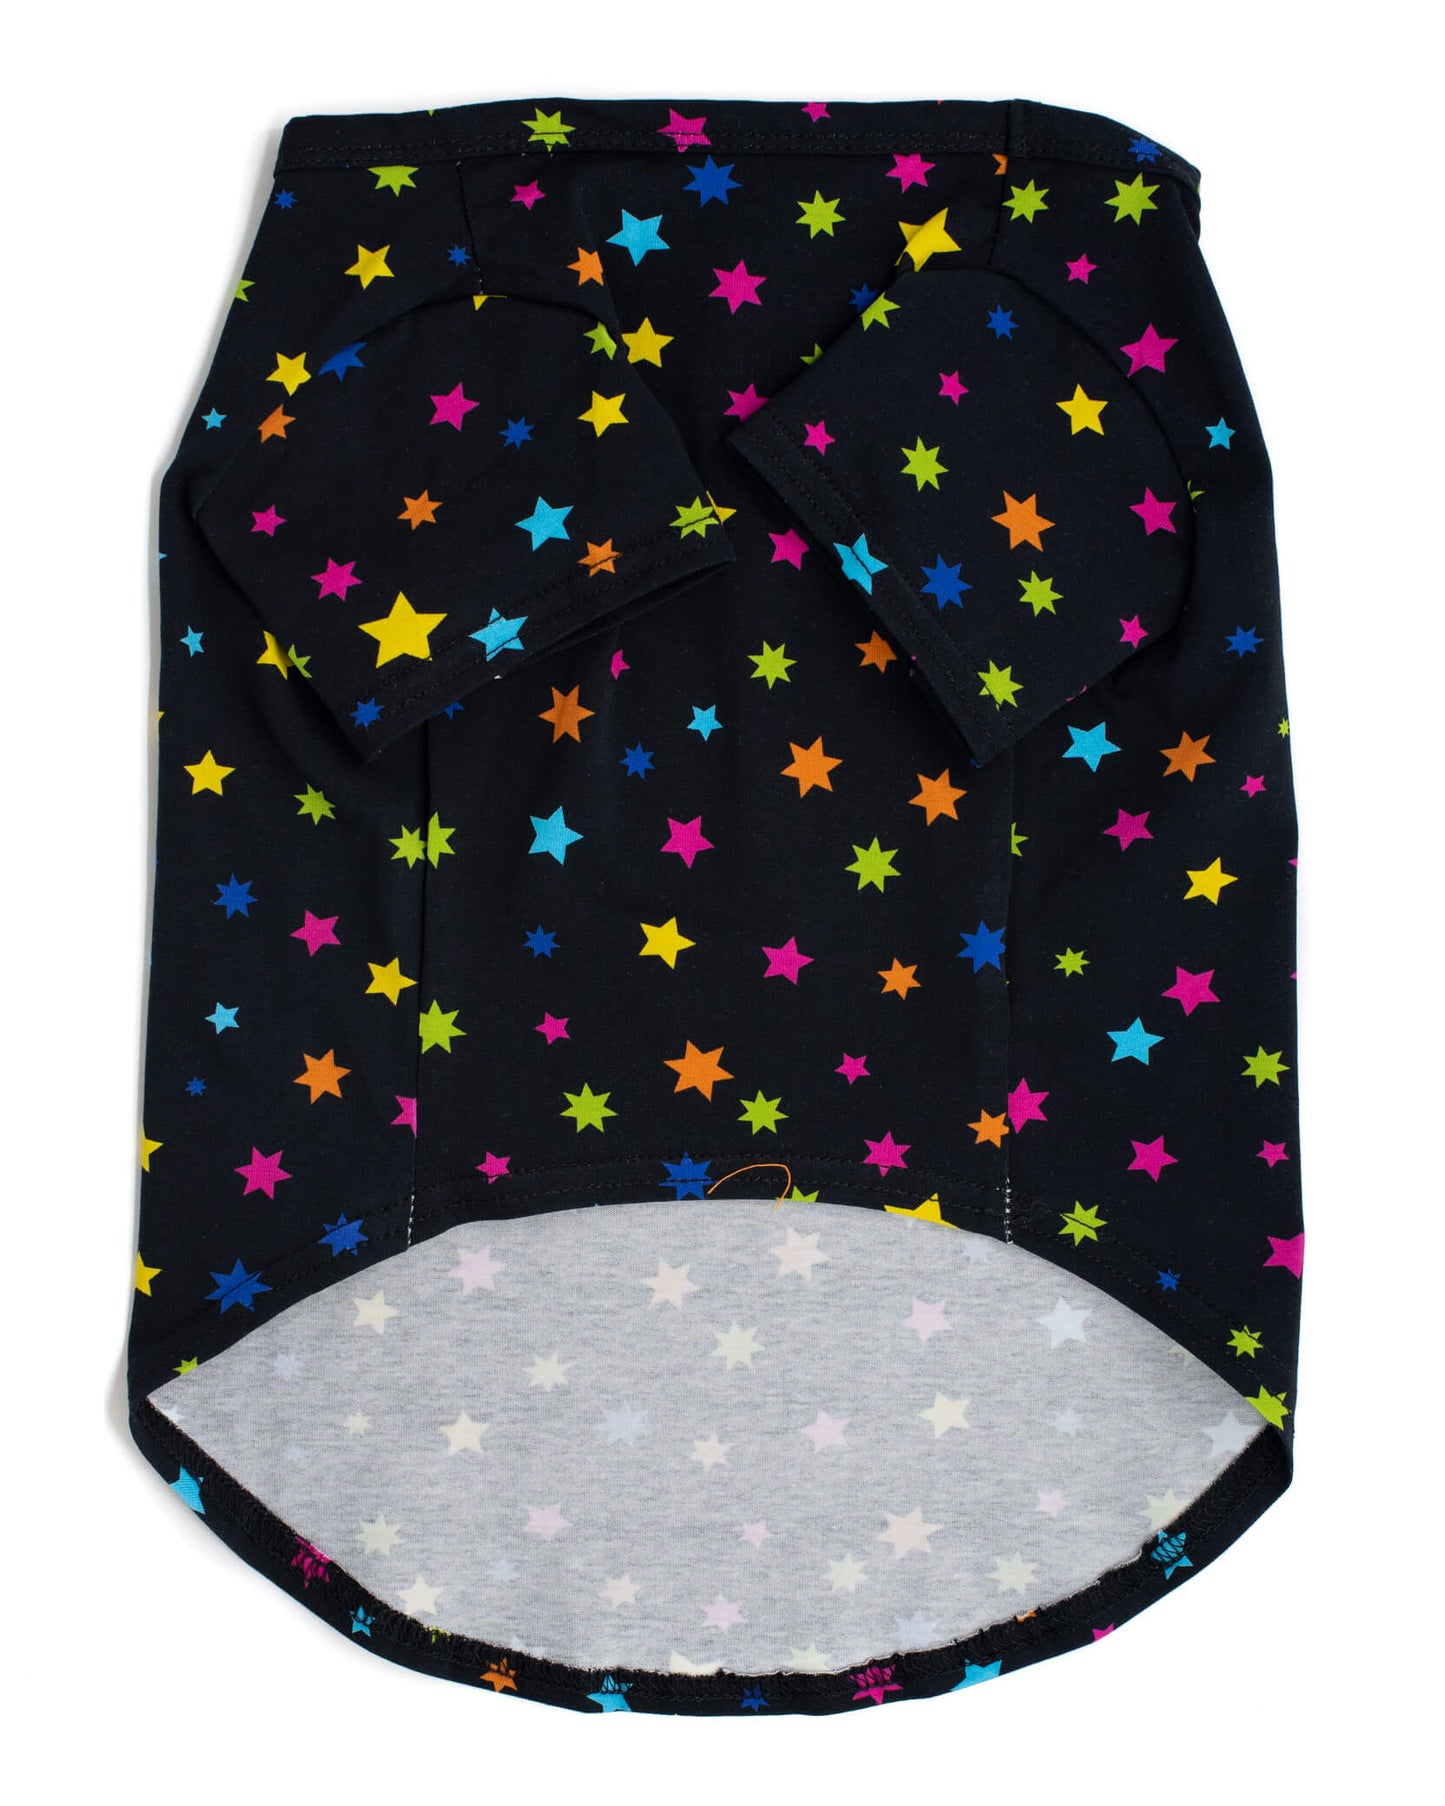  Front flat lay of star gazer dog shirt - black shirt with bright multi-colored stars - Discover the eye-catching design of the star gazer shirt for dogs - Browse our collection of trendy dog shirts and clothing for fashionable canine companions.